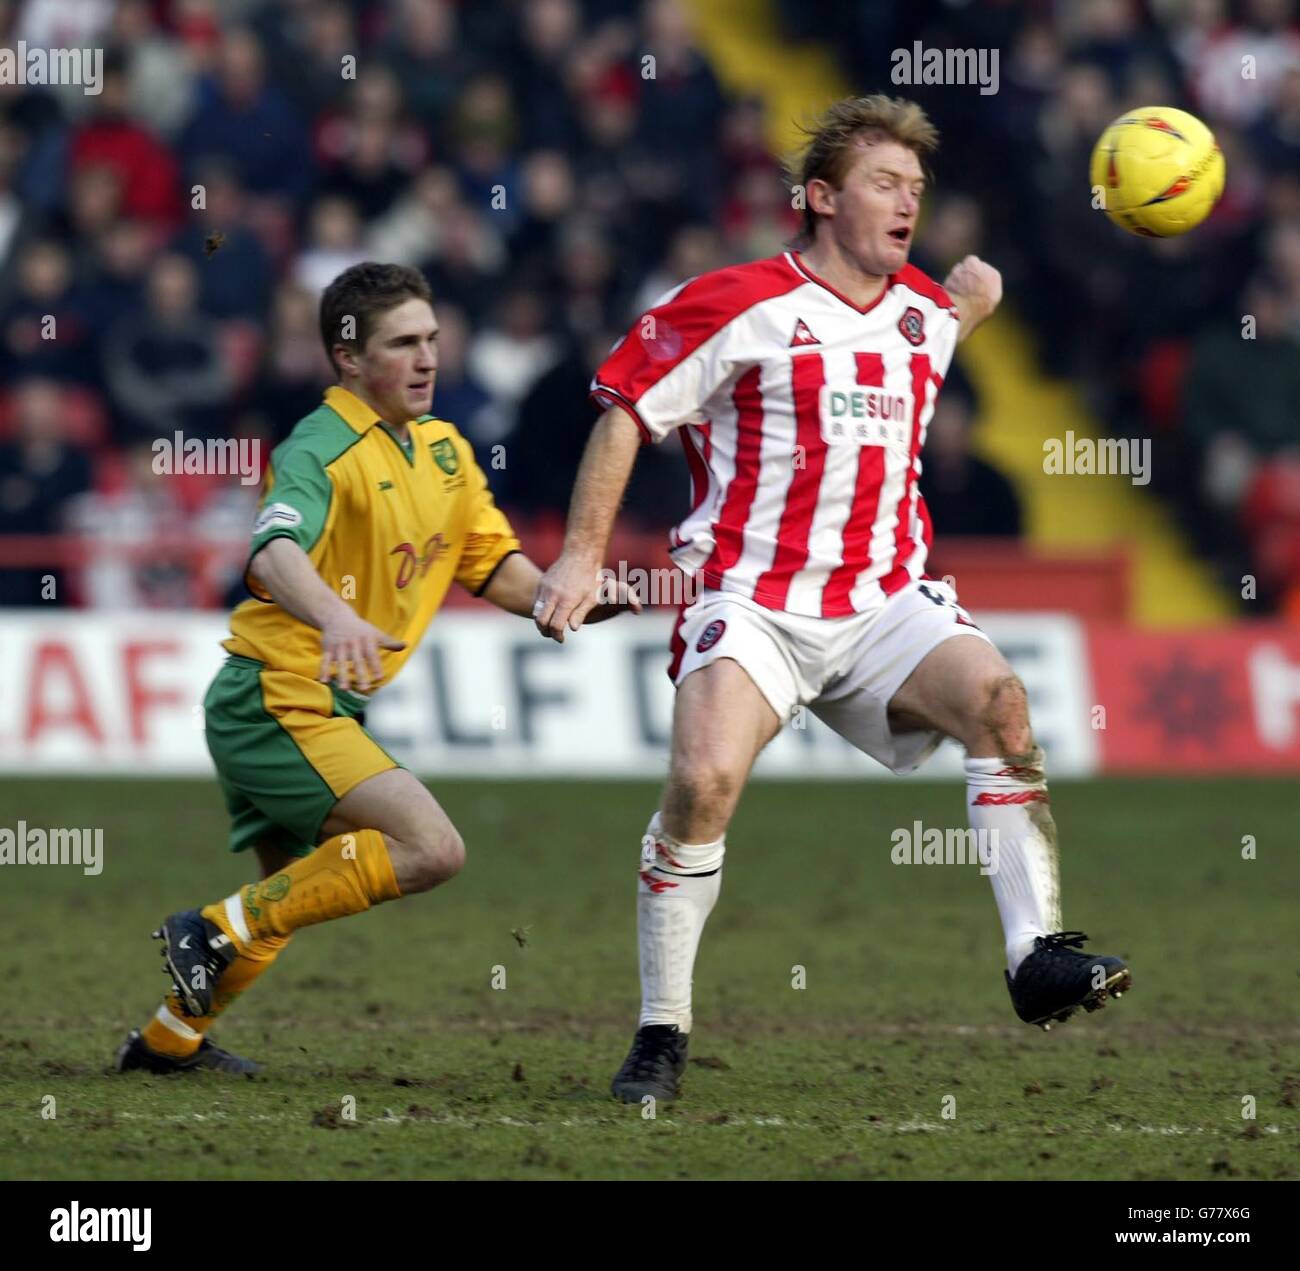 Sheffield United's Stuart McCall holds off Norwich City's Paul McVeigh (L)during their Nationwide Division One match at Sheff United's Bramall Lane. NO UNOFFICIAL CLUB WEBSITE USE. Stock Photo